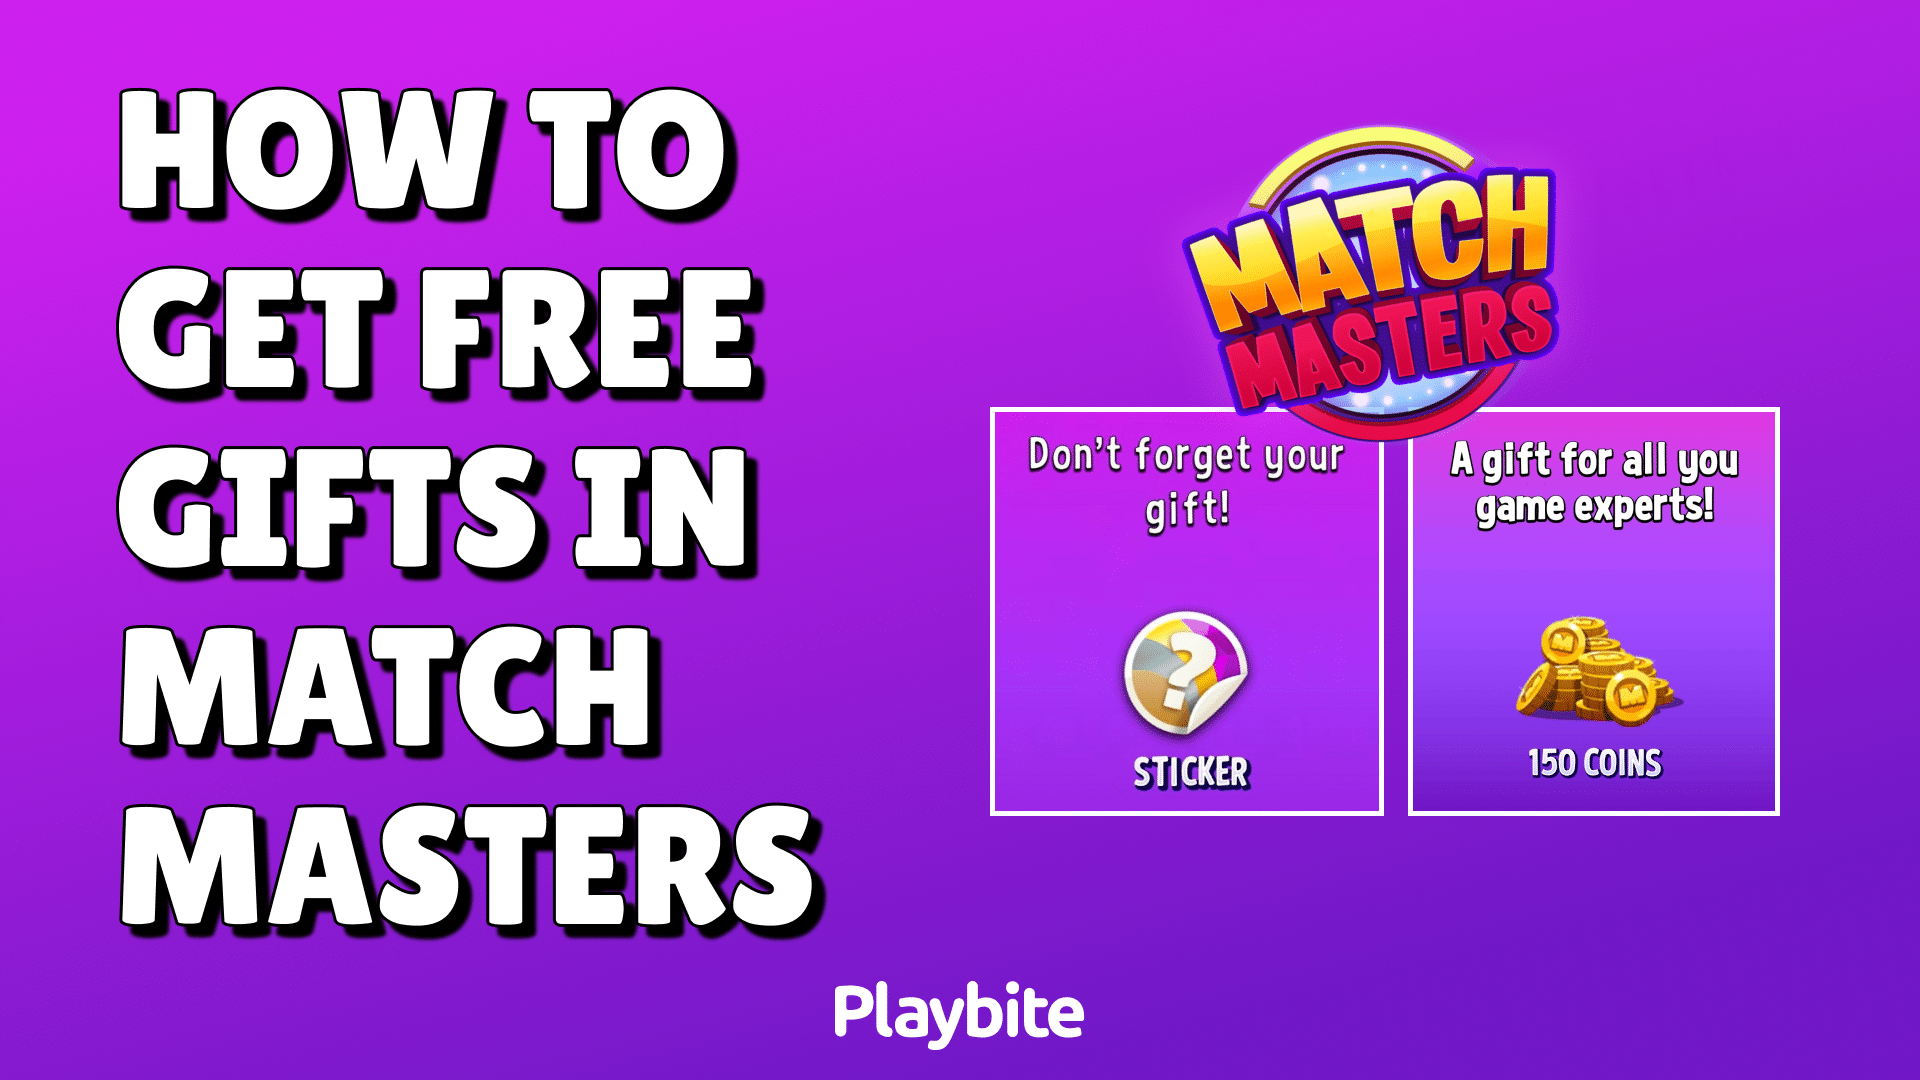 How To Get Free Gifts In Match Masters